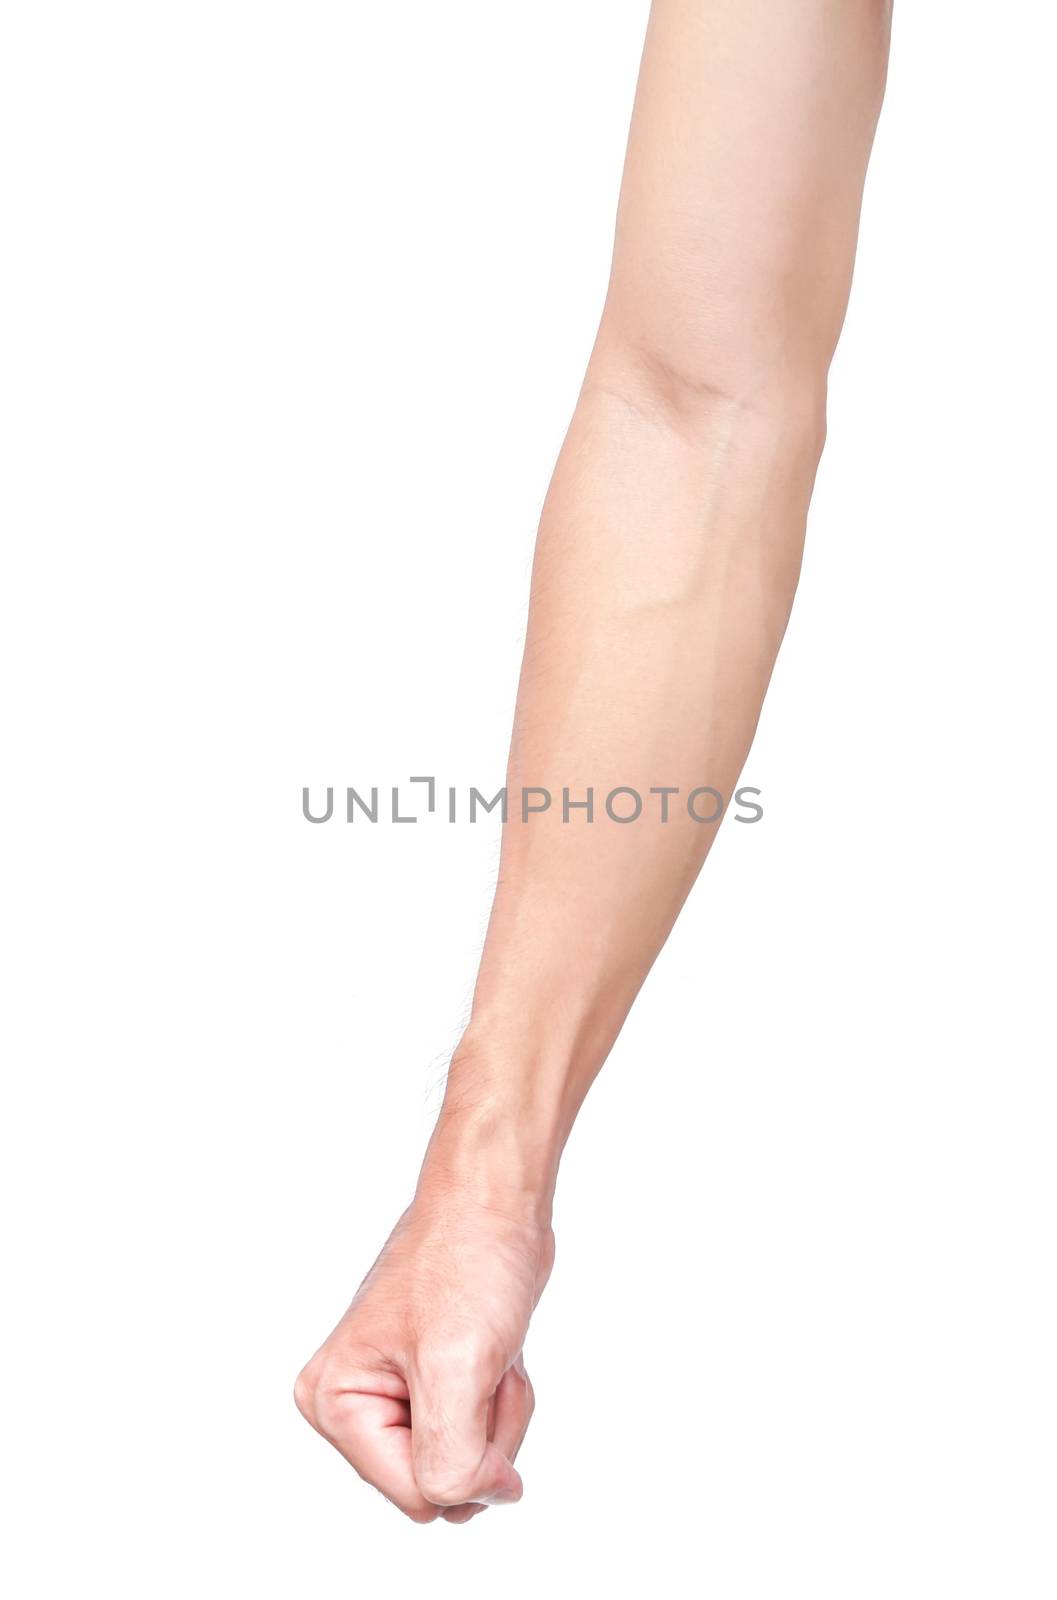 Man arm with blood veins on white background, health care and me by pt.pongsak@gmail.com